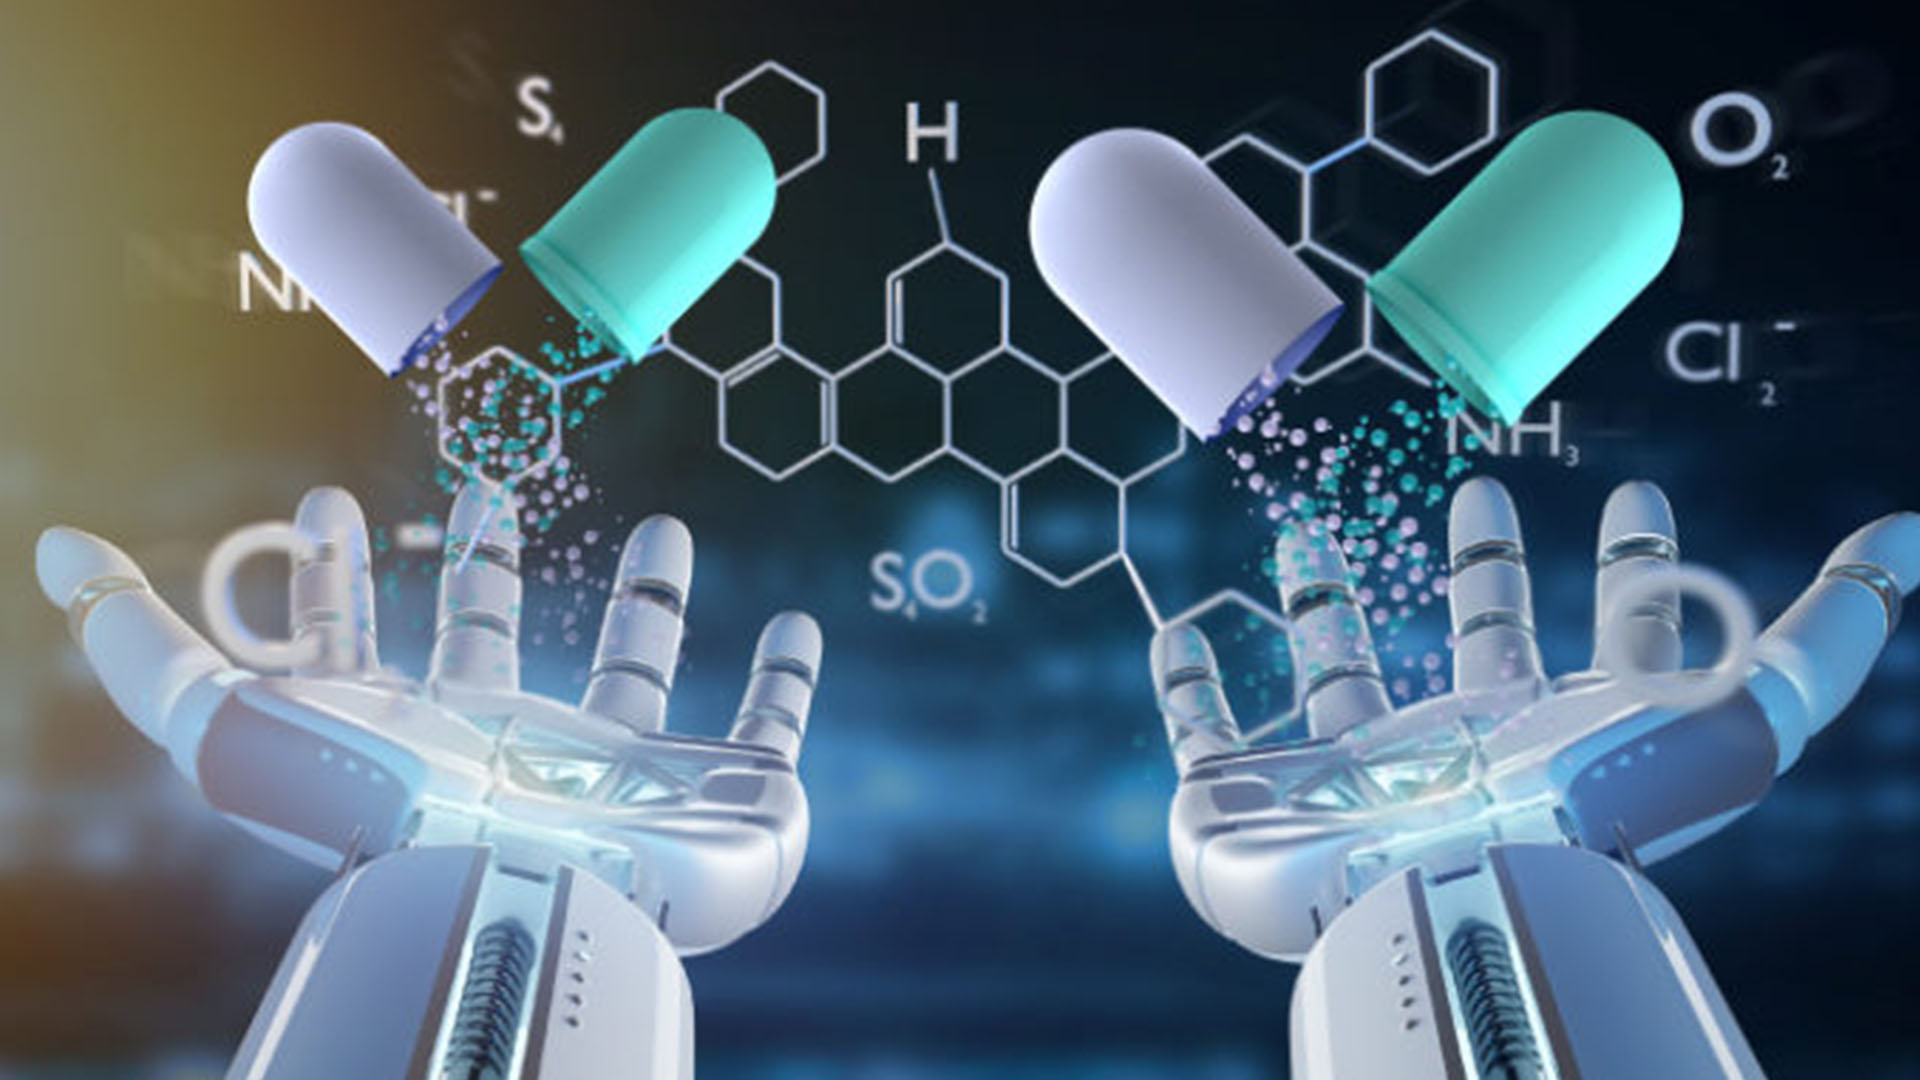 A pair of robotic hands releasing capsules that transition into a dispersion of chemical formulas, signifying AI's role in pharmaceutical research and drug development.